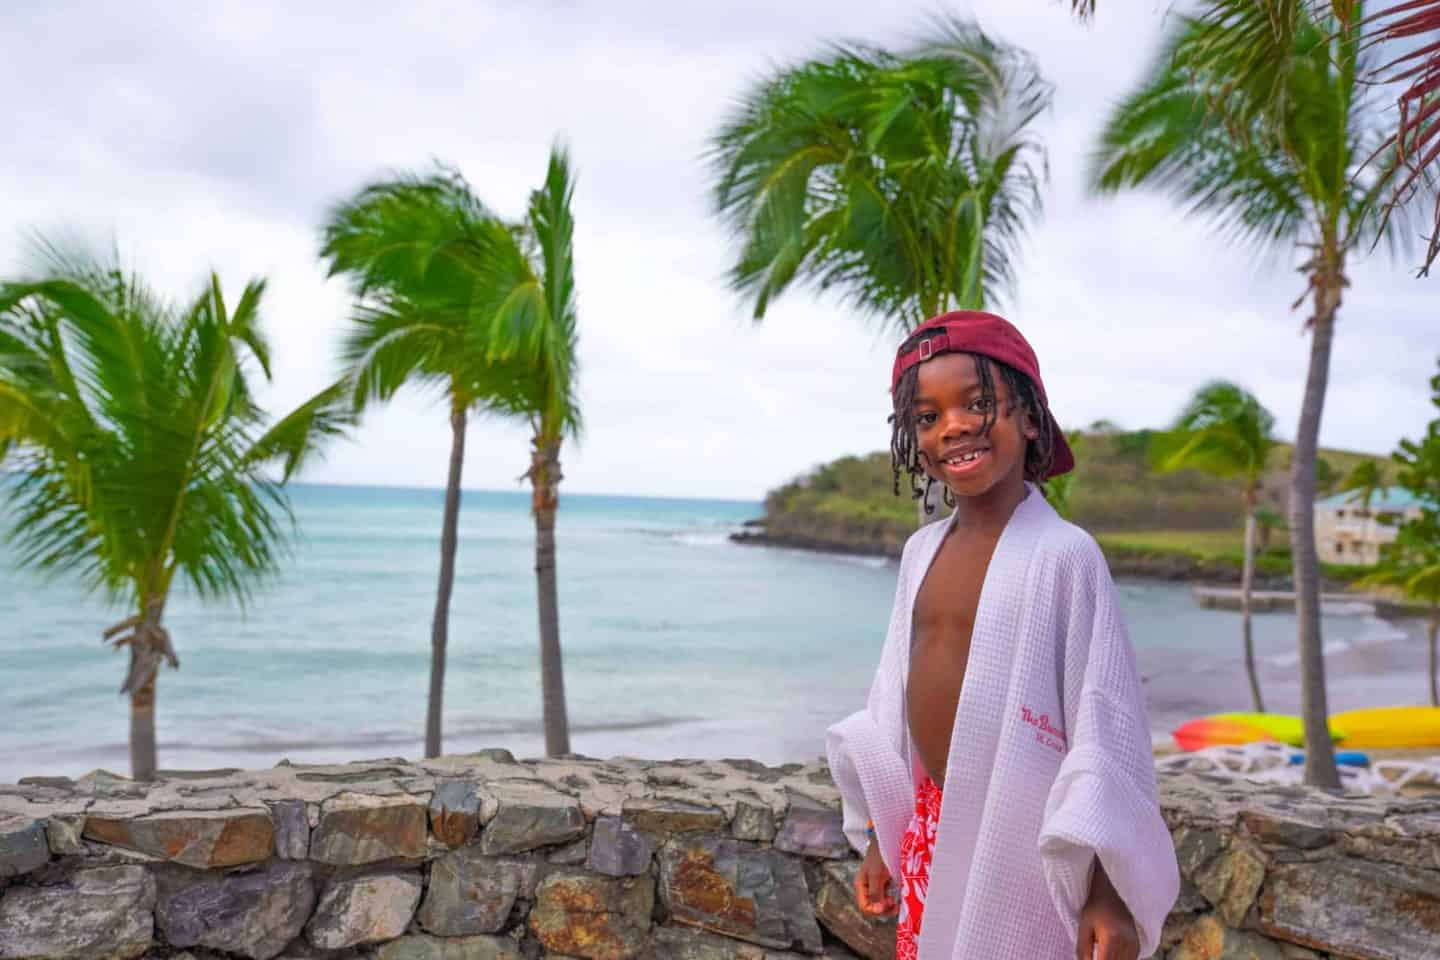 Black Family Travel Things To Do In St Croix Black Family Travel Black Travelers Black Kids Travel Black Family Traveling The World Black Worldschoolers African American Family 200